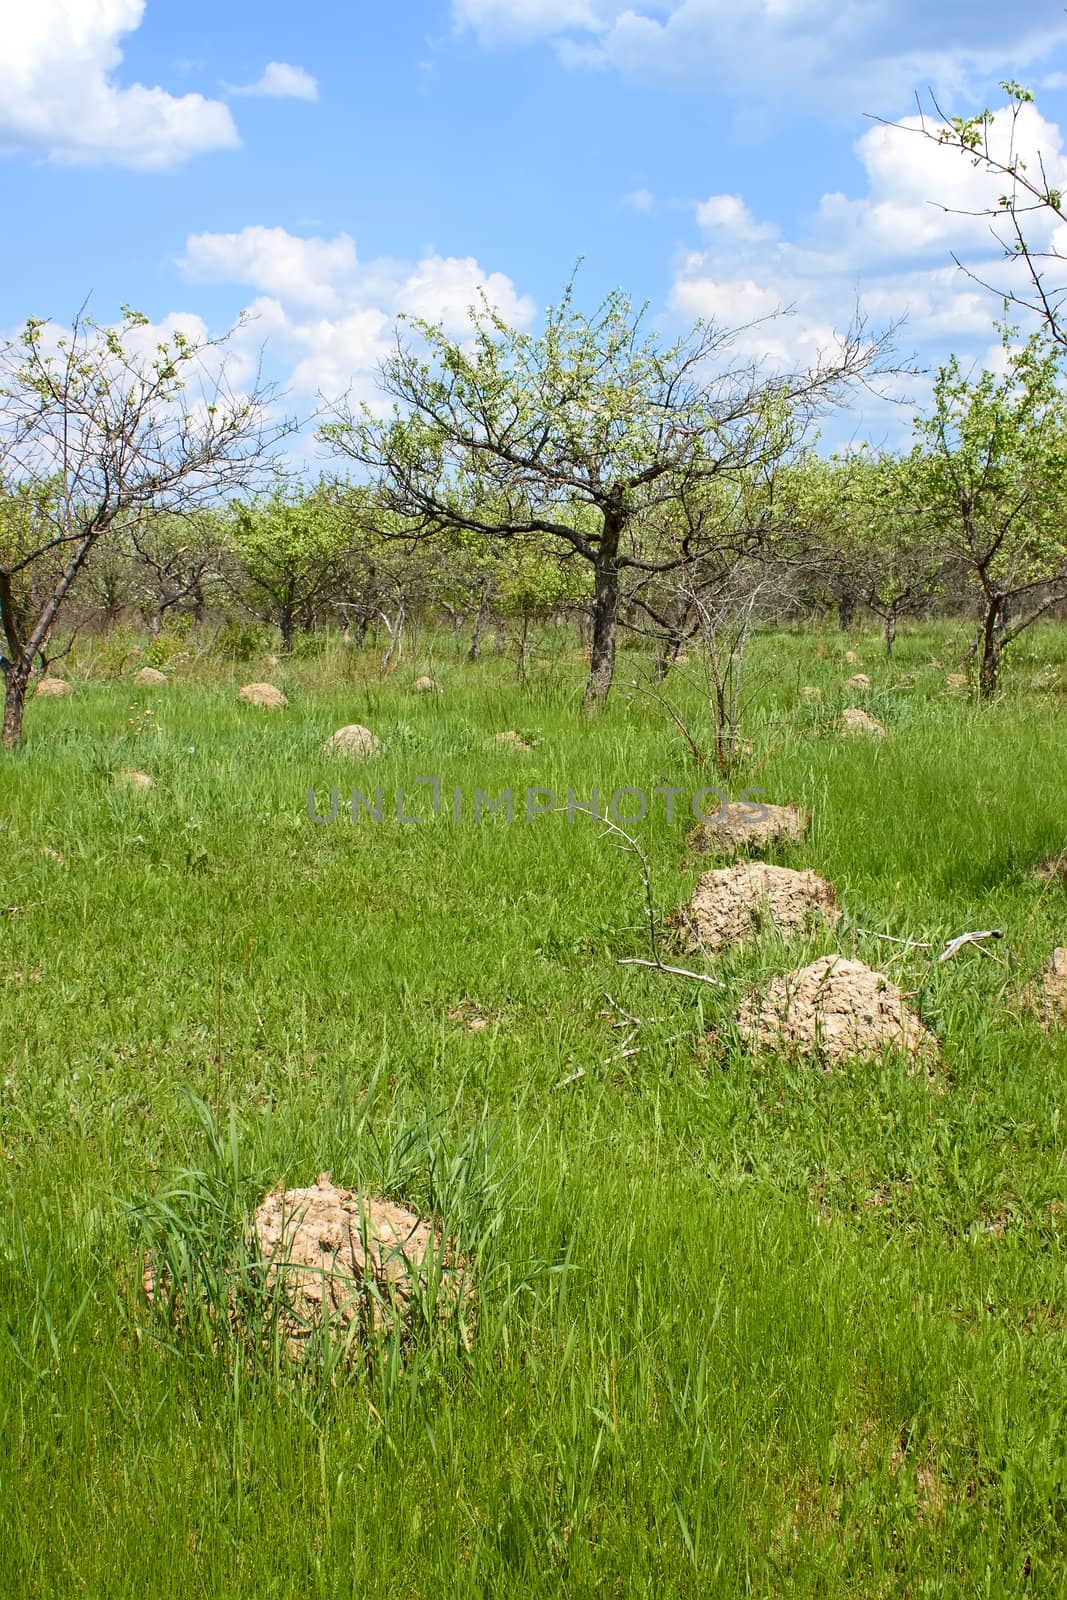 High anthill among green grass in abandoned old orchard in springtime